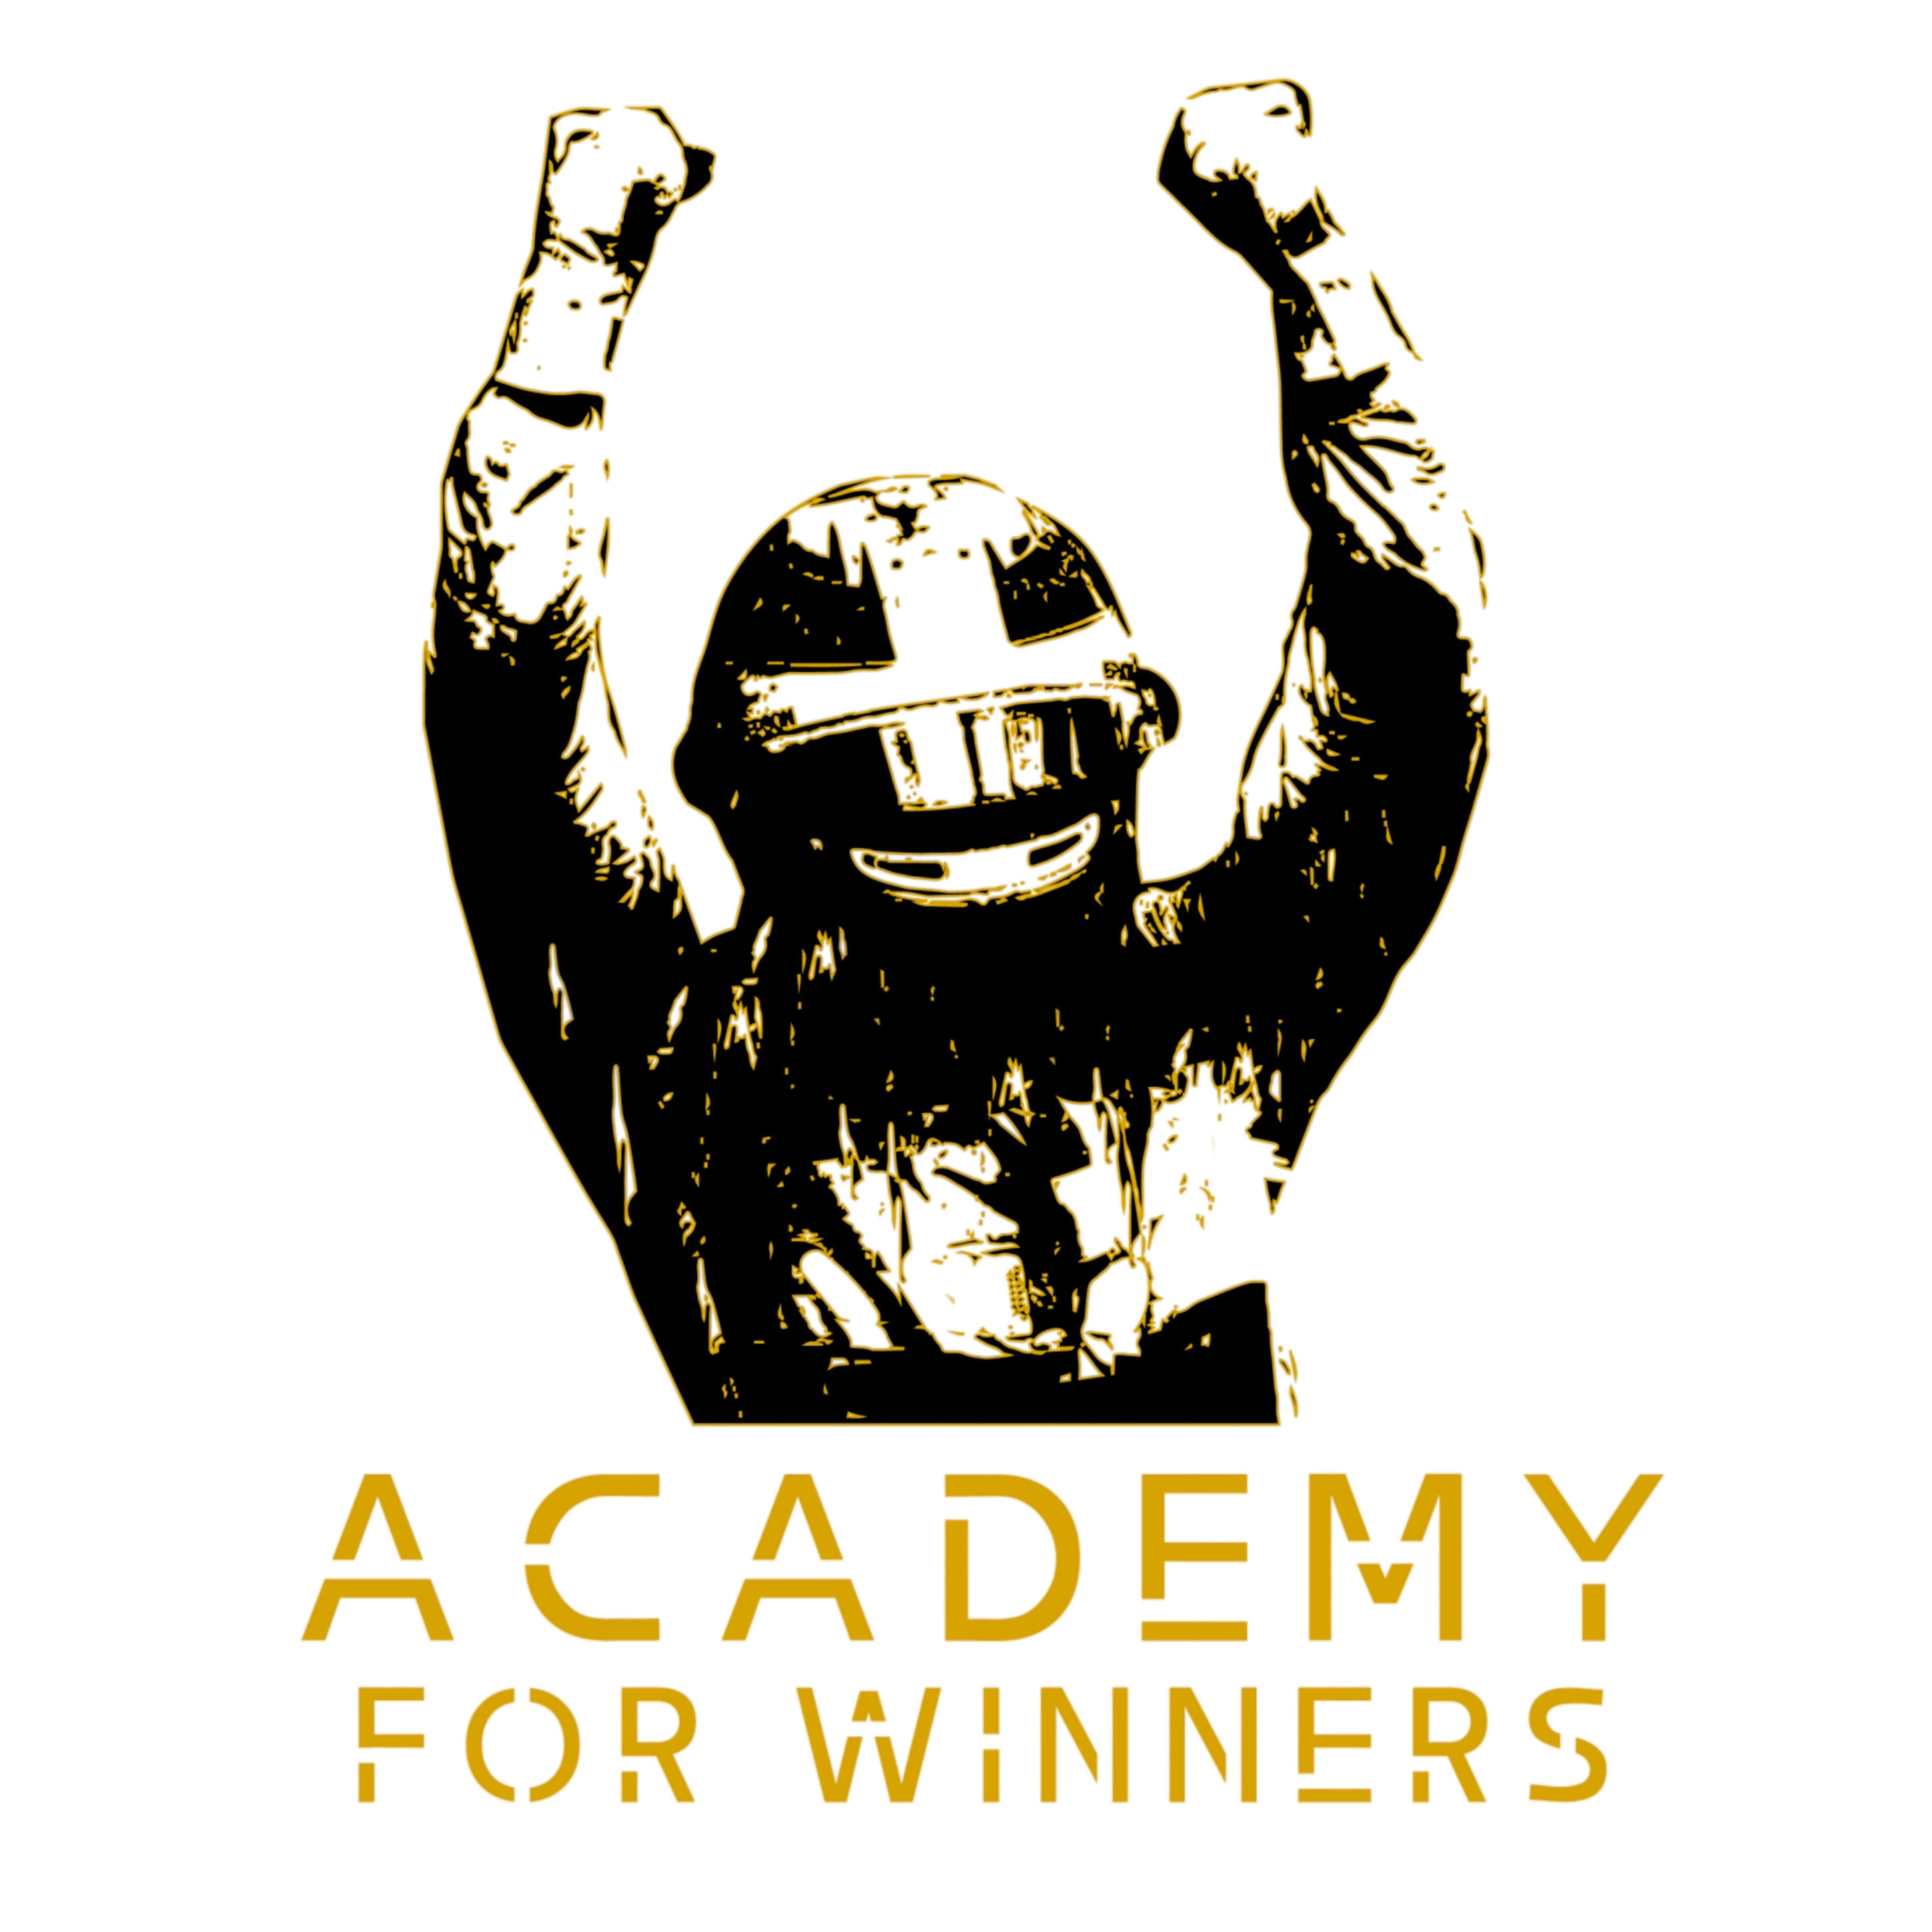 Protetto: Academy for winners